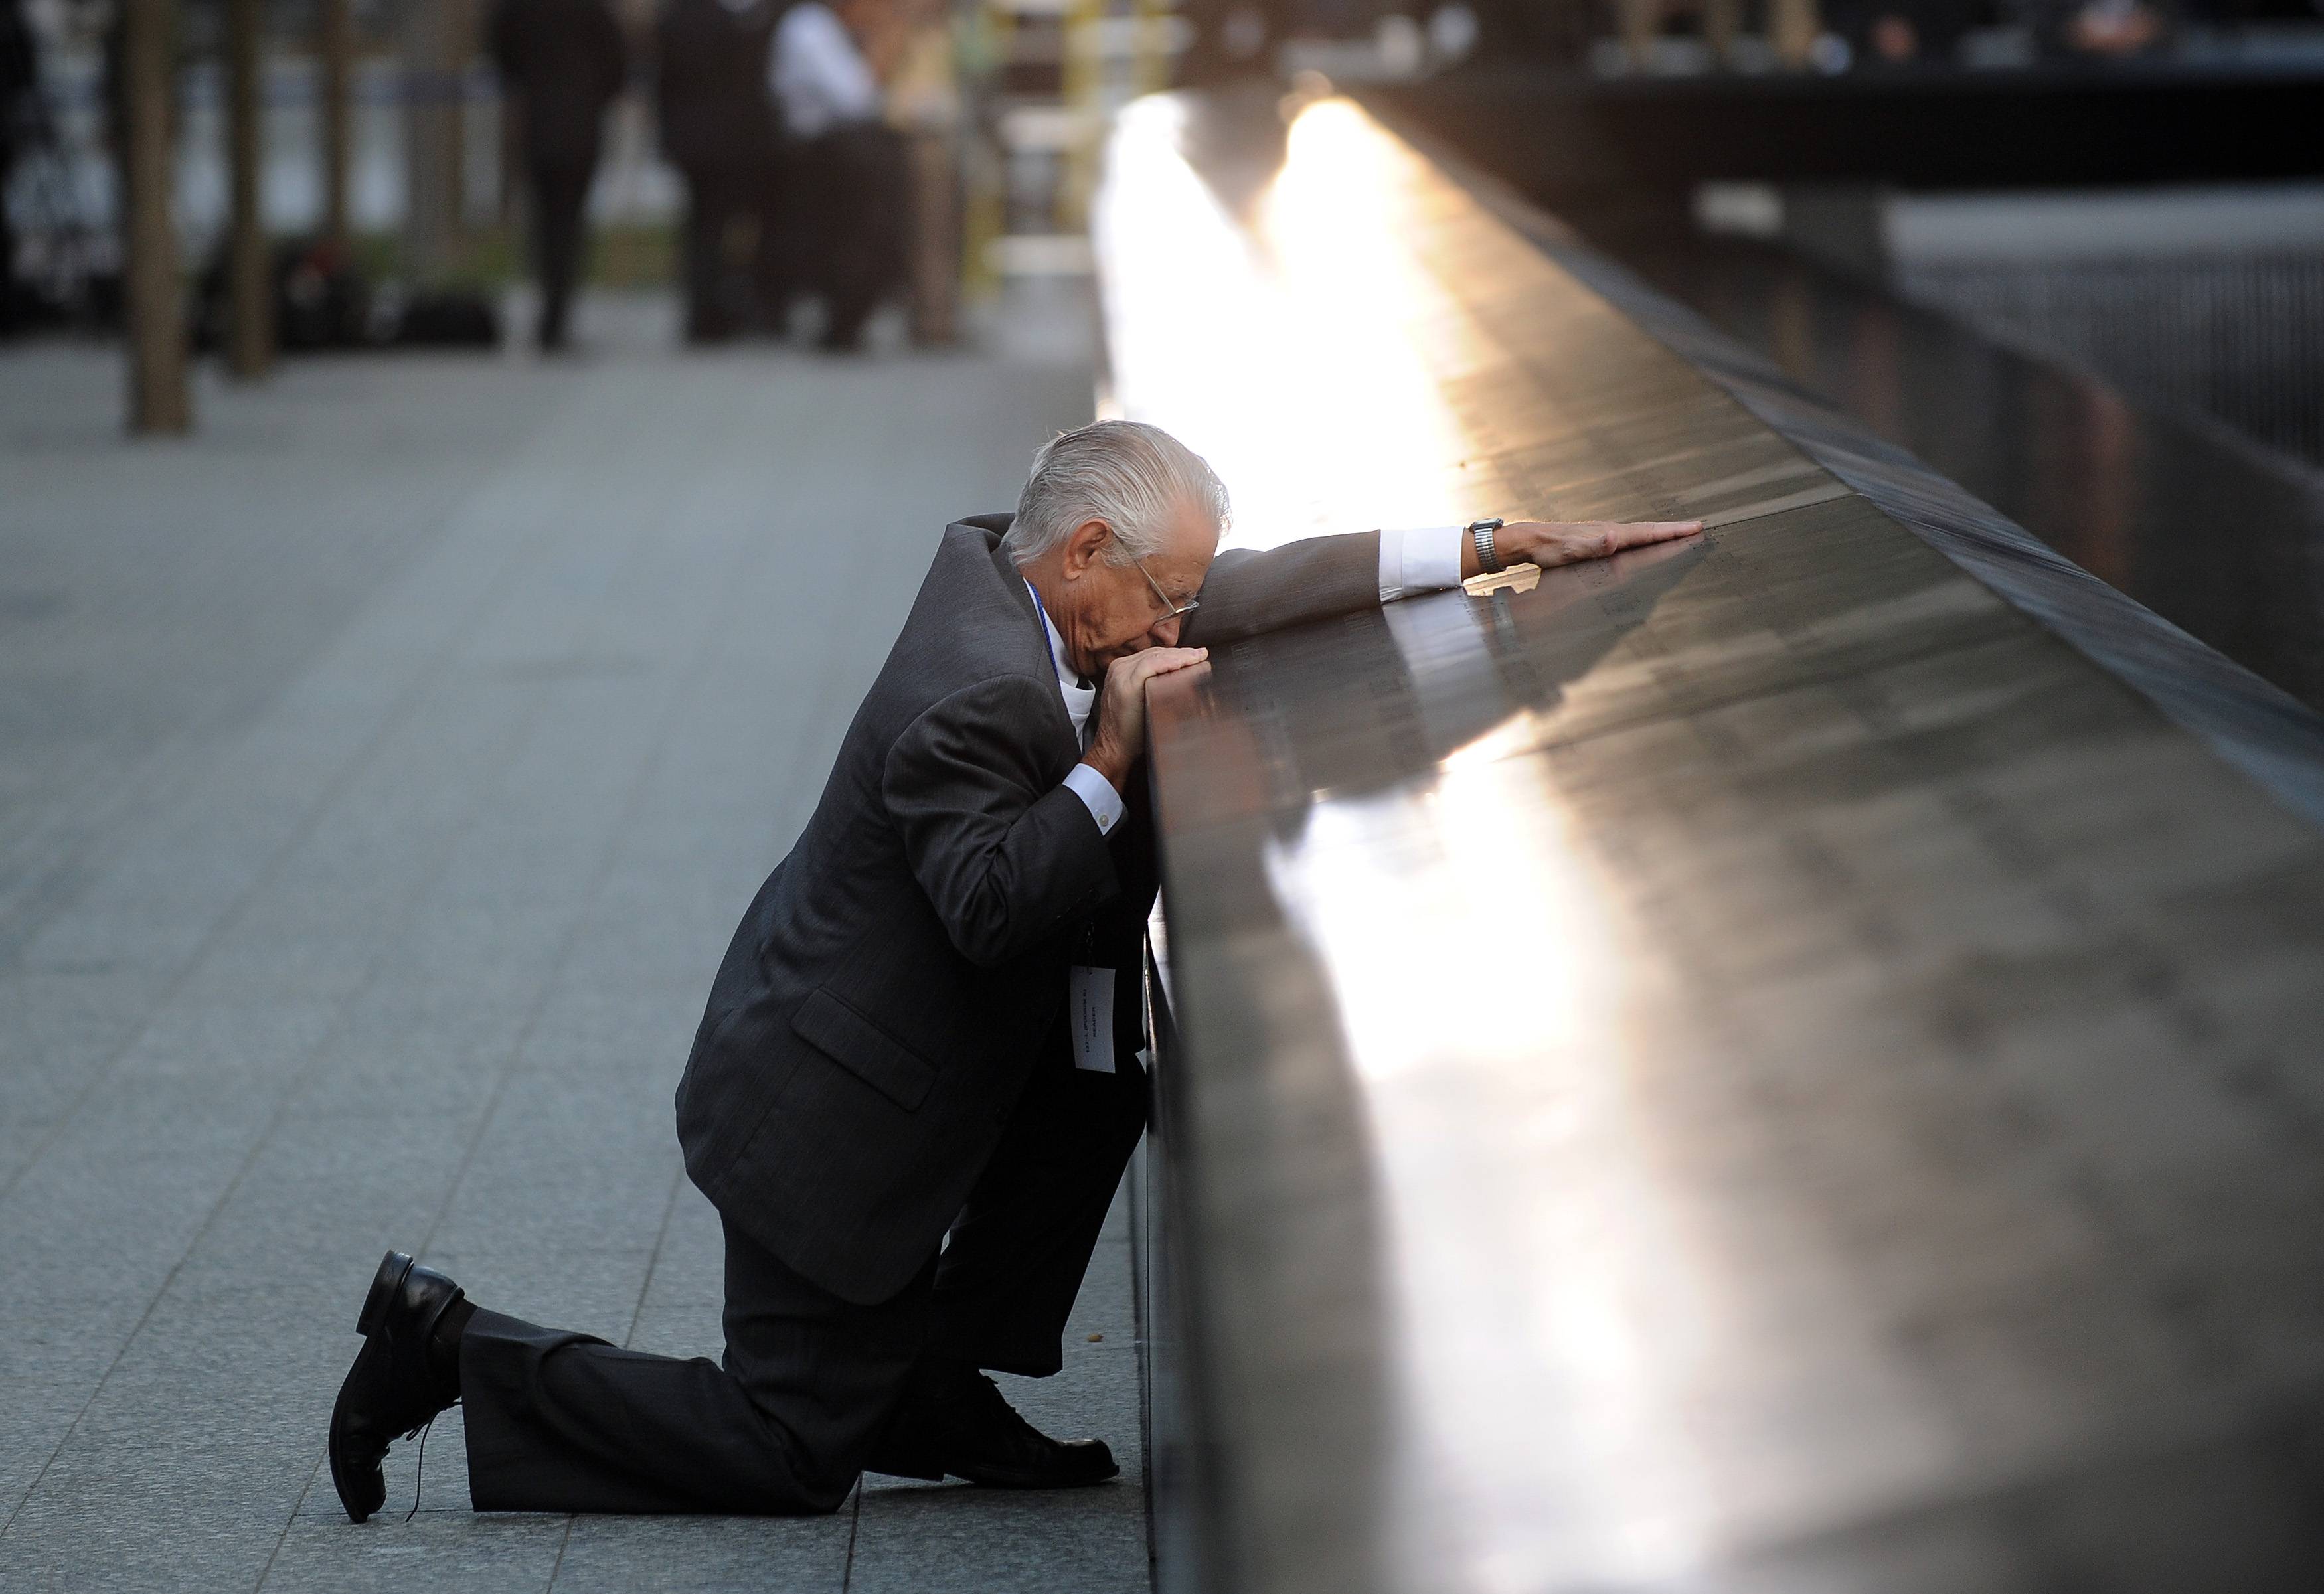 A Father Mourns - Robert Peraza, who lost his son Robert David Peraza in the attacks at the World Trade Center, pauses at his son's name at the north pool of the 9/11 Memorial.(Photo: AP Photo/Justin Lane, Pool)